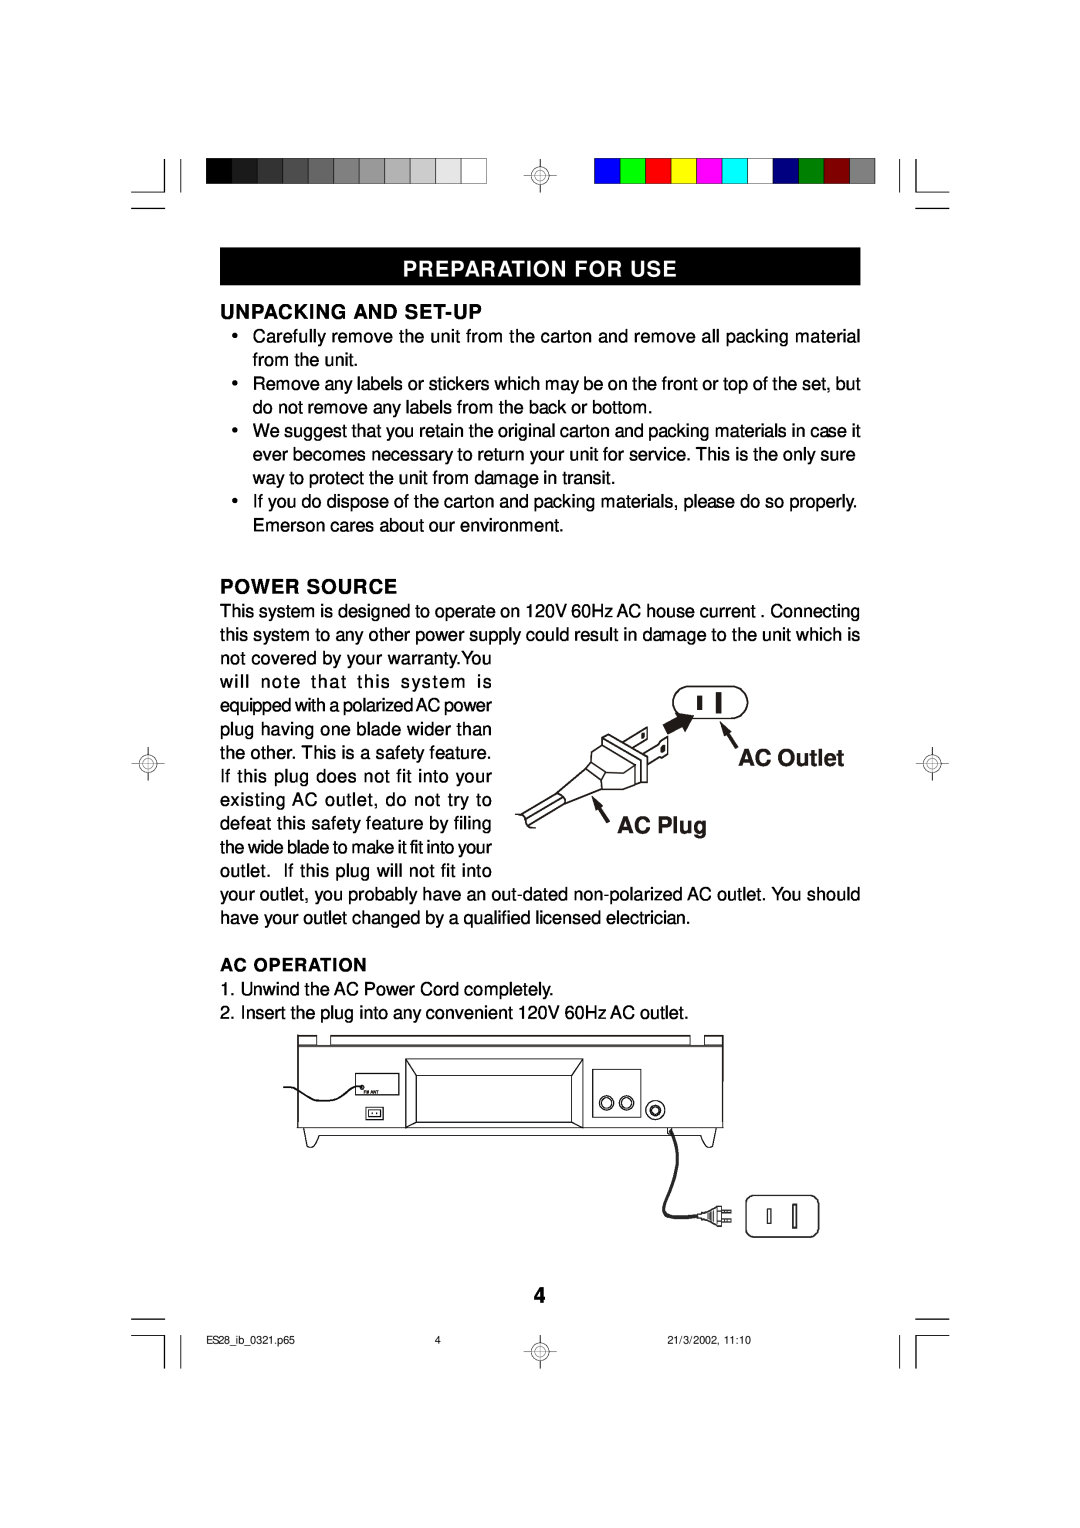 Emerson ES28 owner manual Preparation For Use, Unpacking And Set-Up, Power Source, Ac Operation 